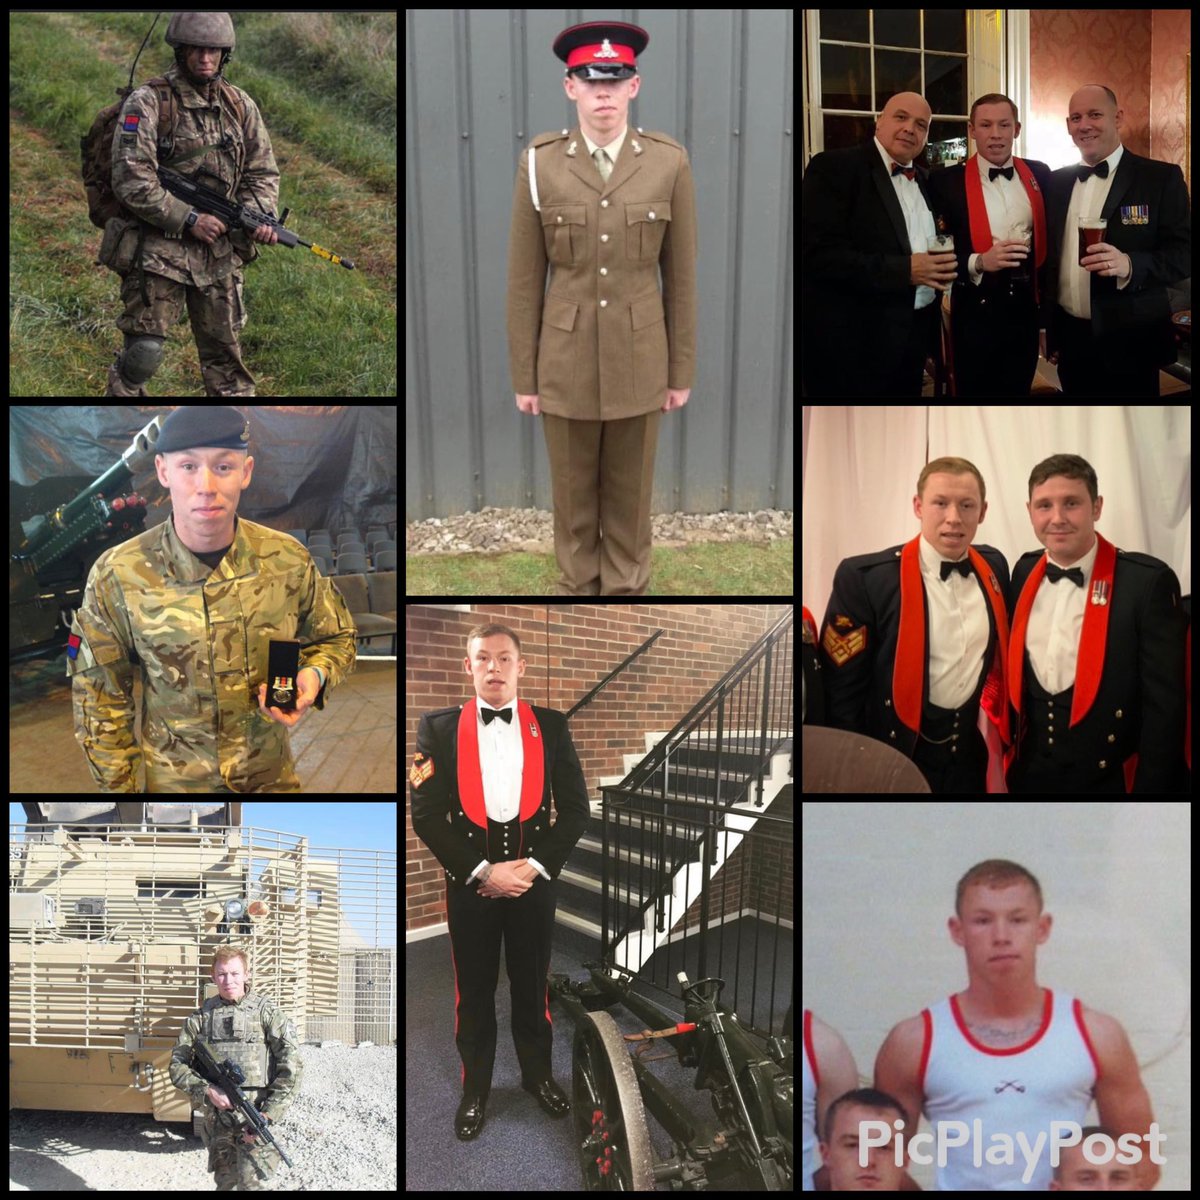 A very happy #ArmedForcesDay to all🇬🇧💂‍♀️. An organisation that has given me the foundations to become who I am today. Recognises potential, promotes confidence in our own abilities and enables us to make friends that will last a lifetime #ArmyConfidence #Thisisbelonging